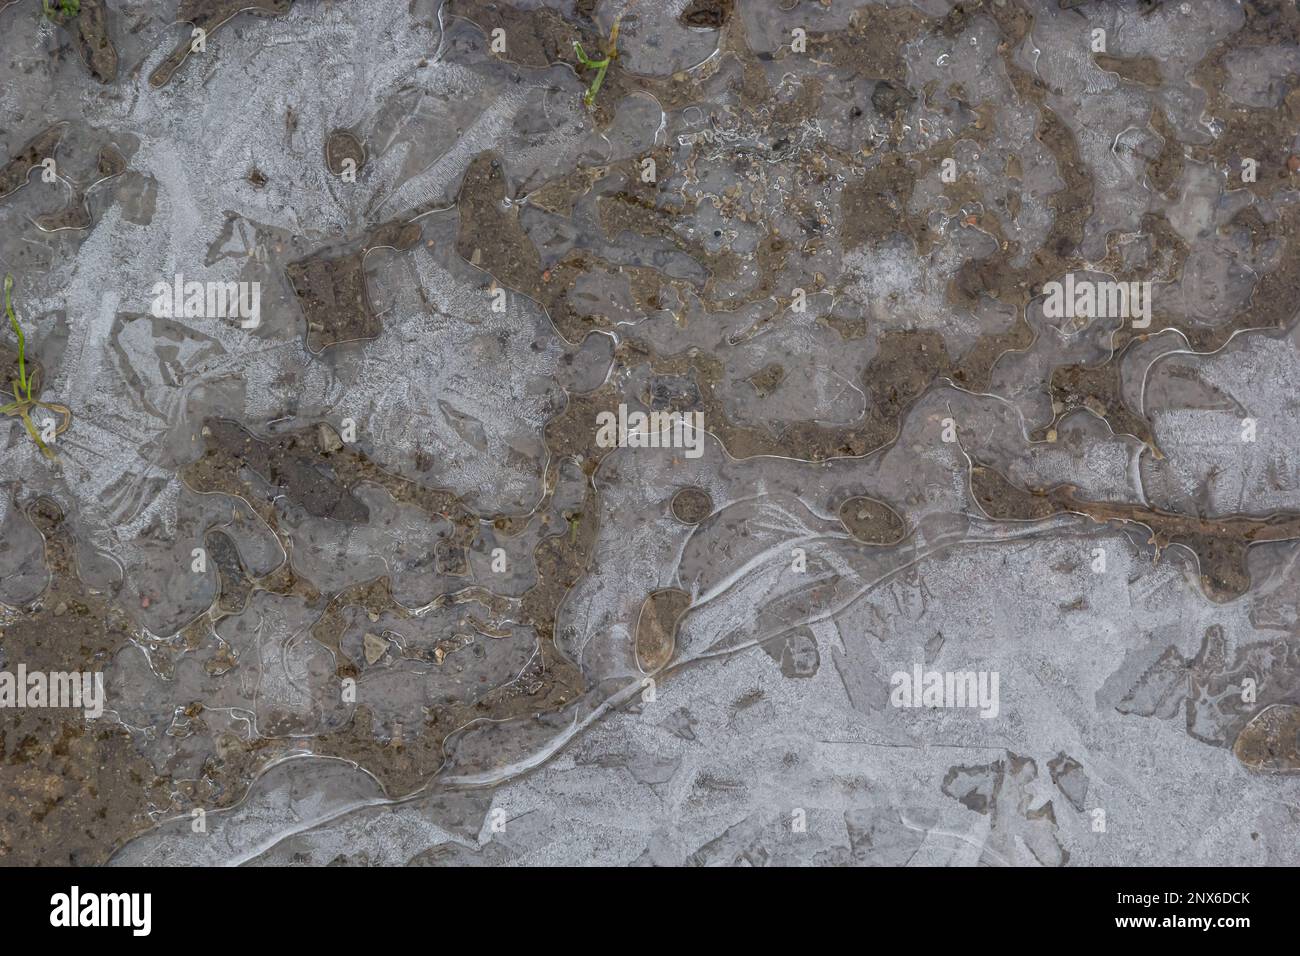 beautifully frozen water in a puddle. air bubbles inside the ice. frozen mud. Stock Photo